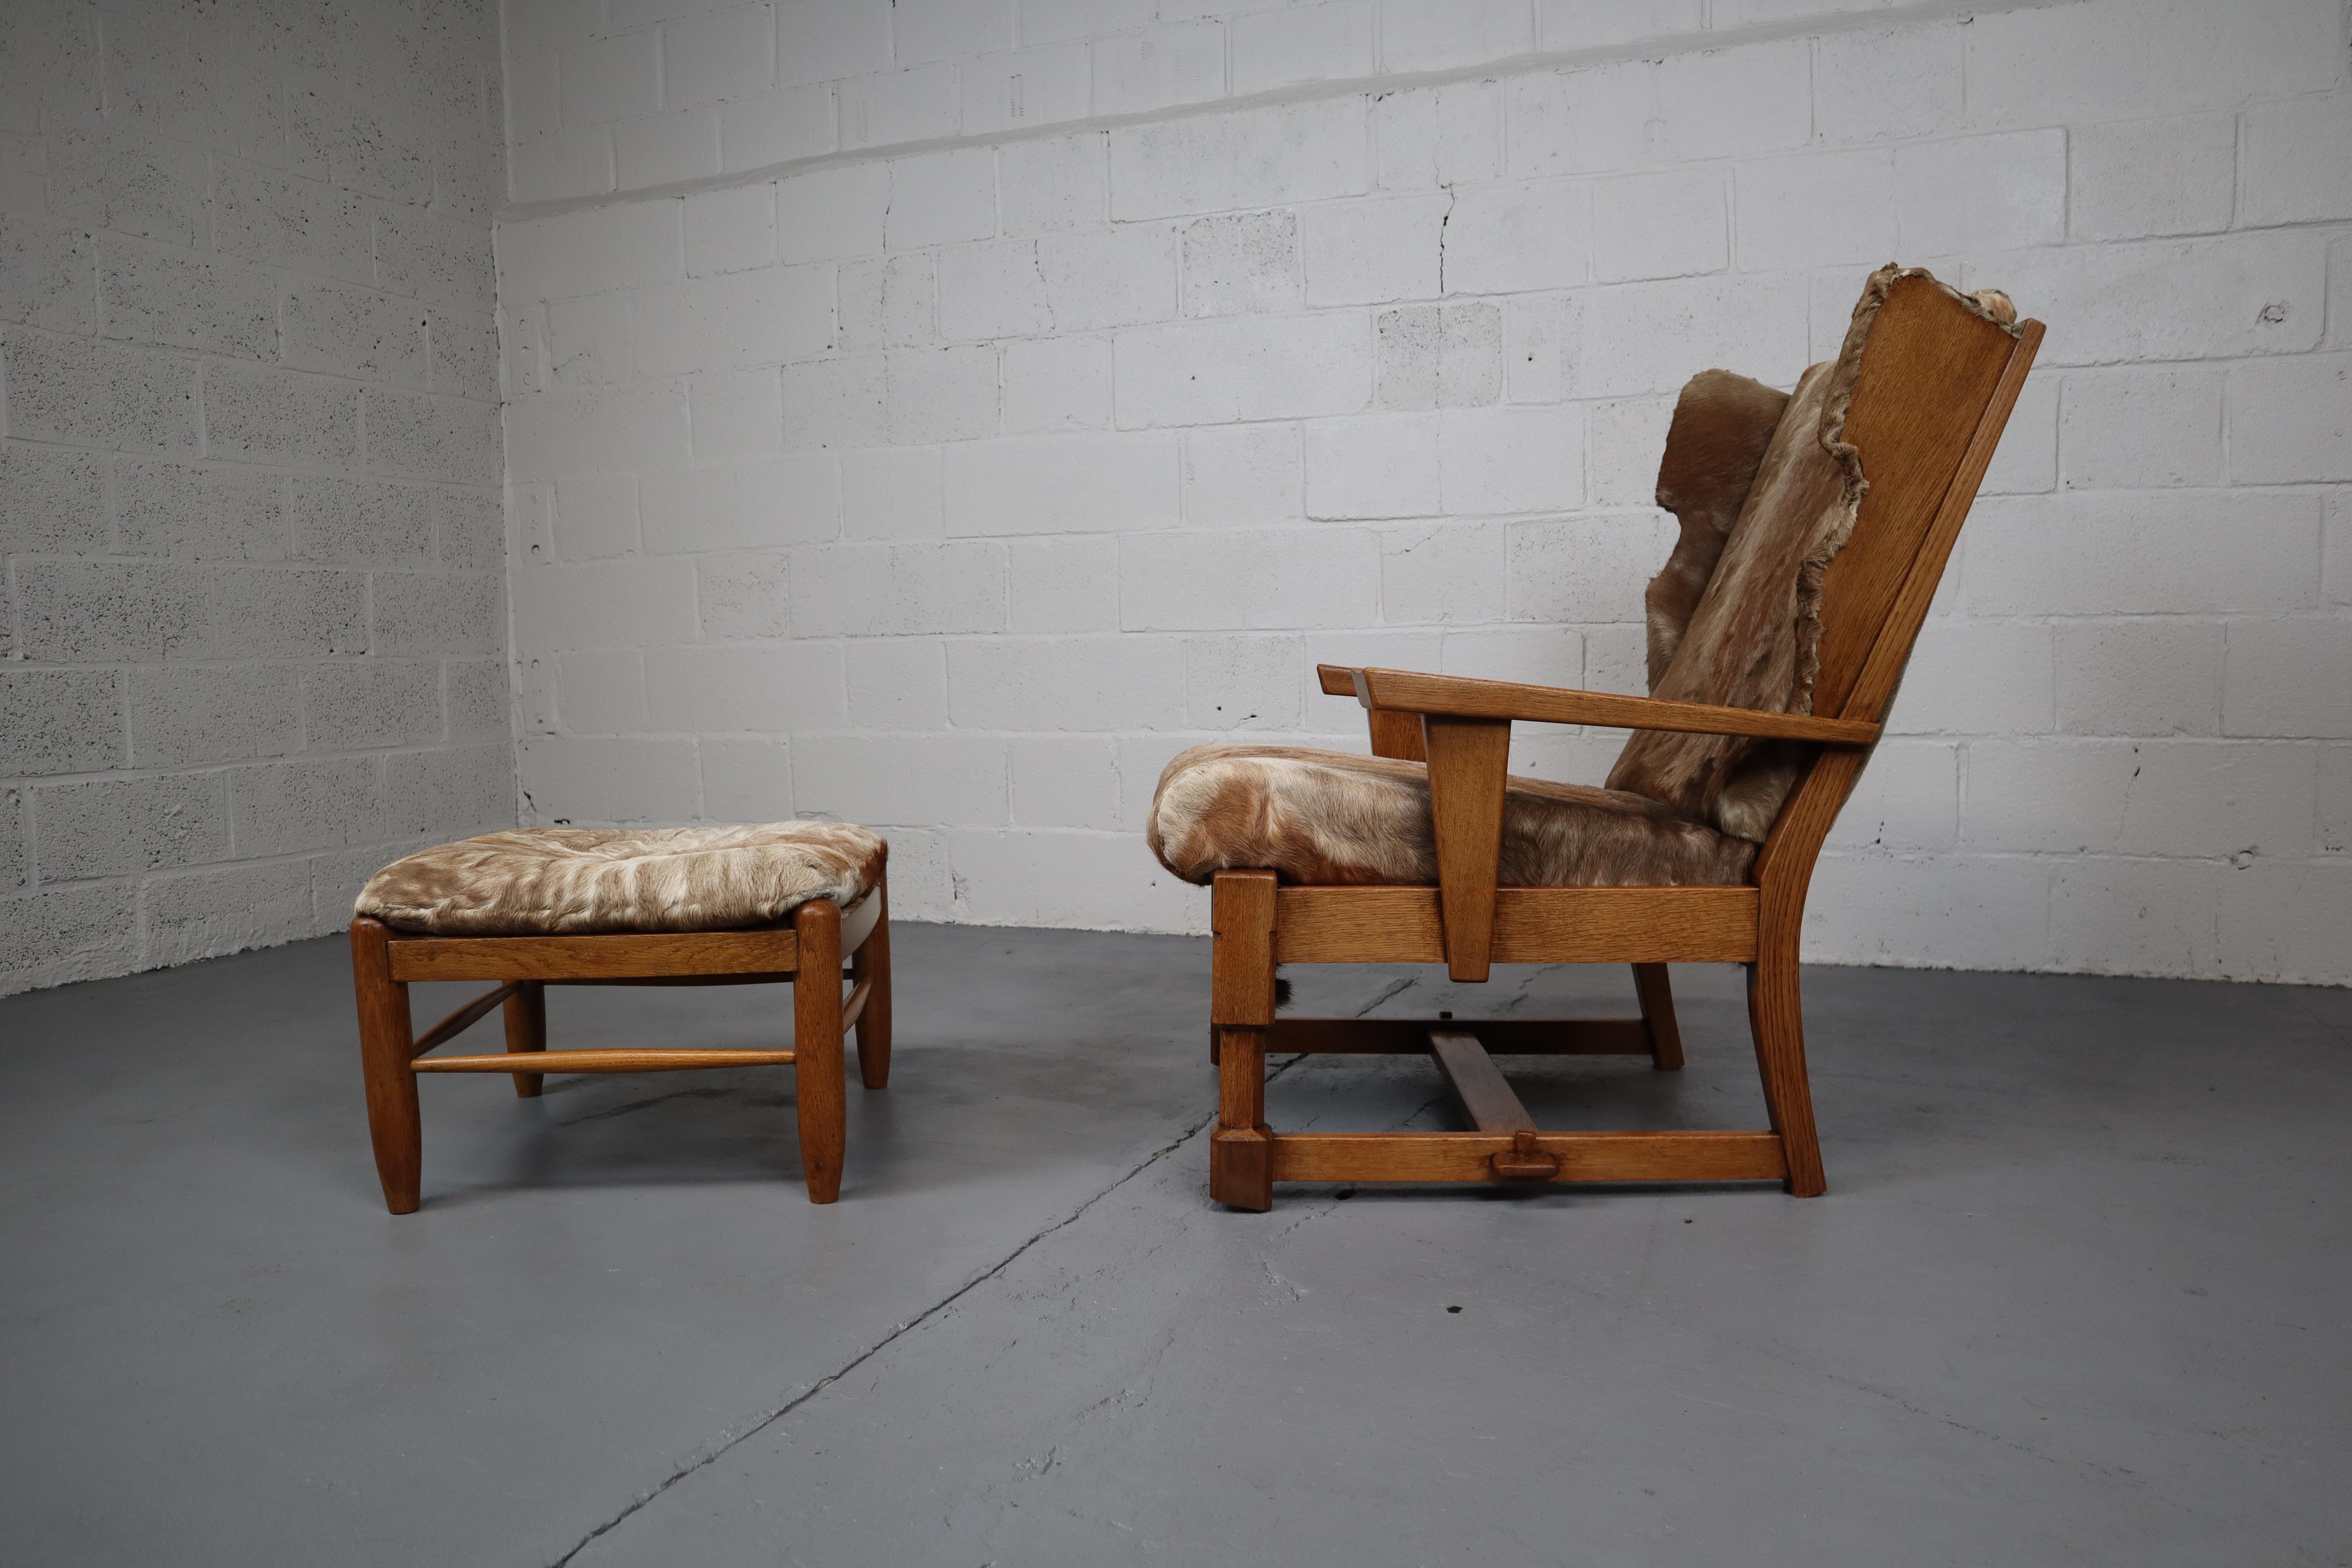 Robust and heavy massive oak lounge chair with ottoman, both upholstered in goathide. Brutalism is a movement within architecture that originated from modernism. It is characterized by often large block-like structures and rough material. Because of